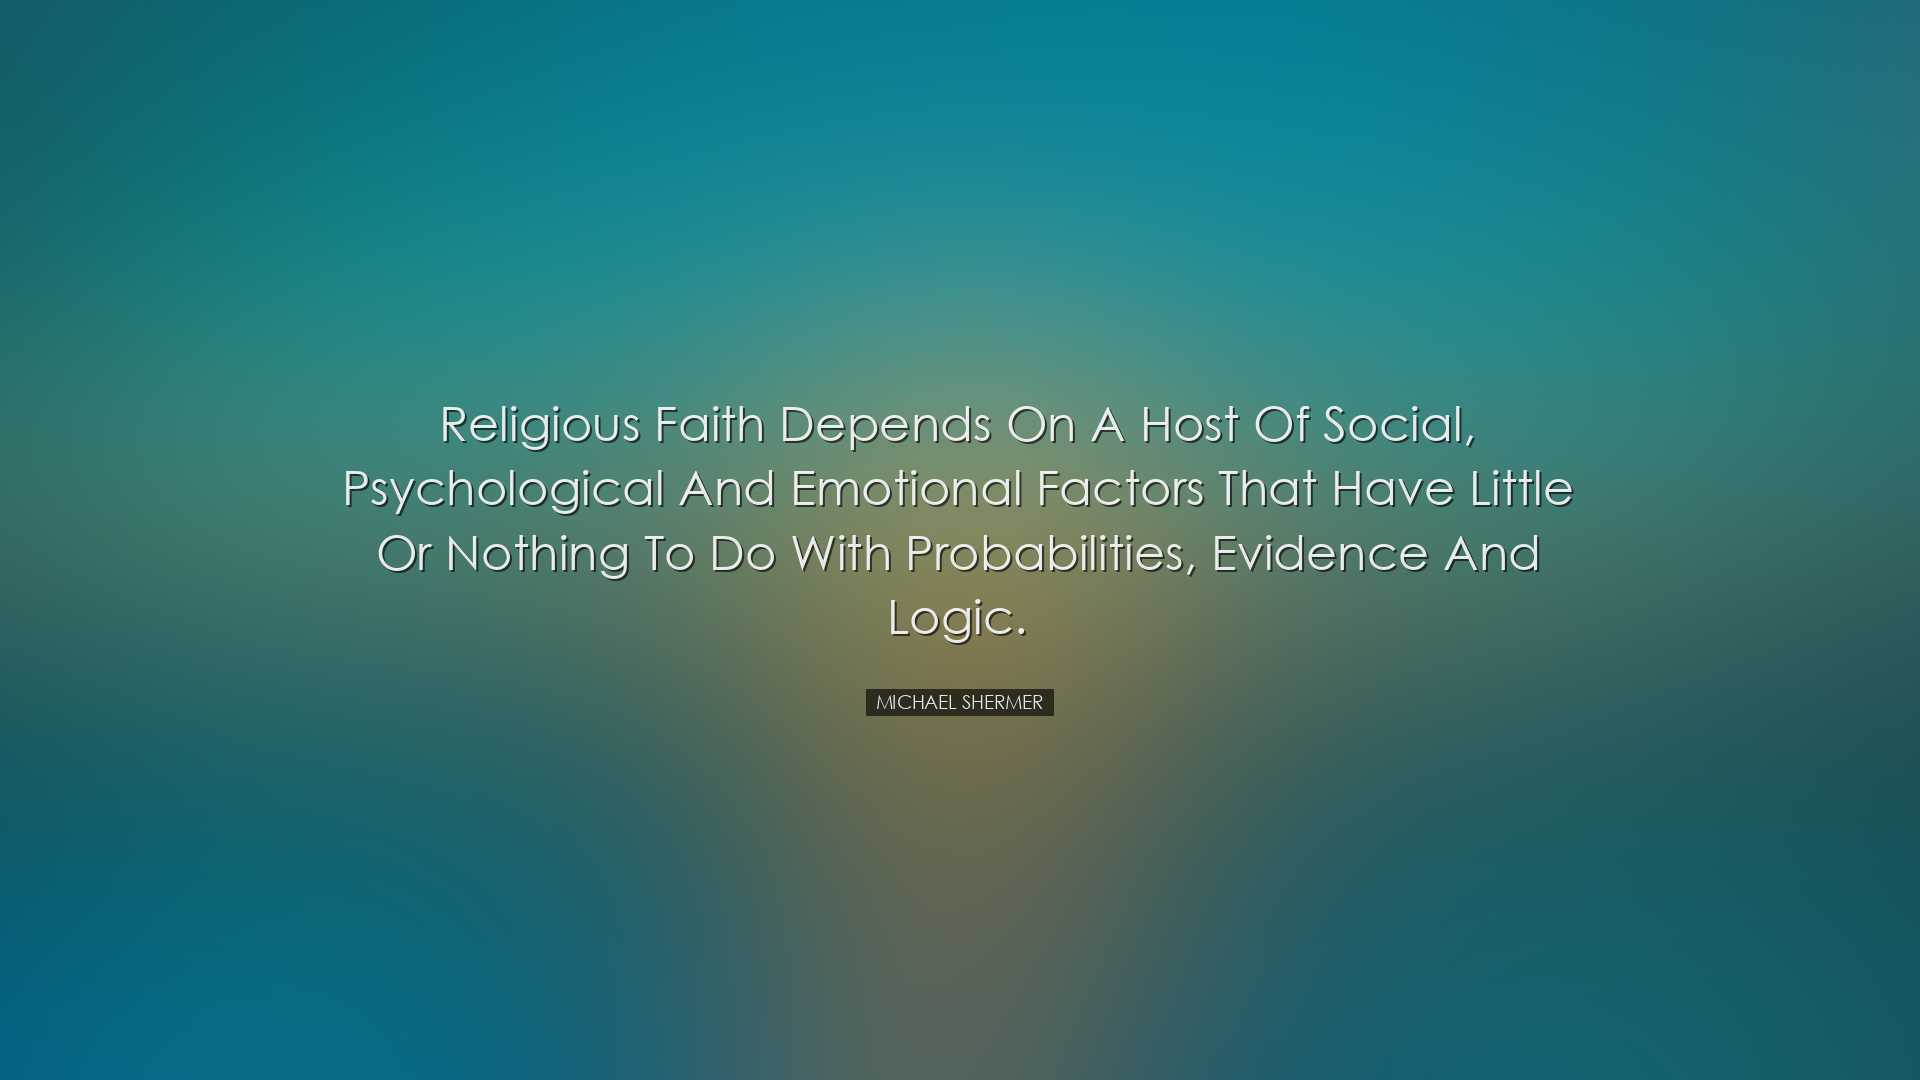 Religious faith depends on a host of social, psychological and emo